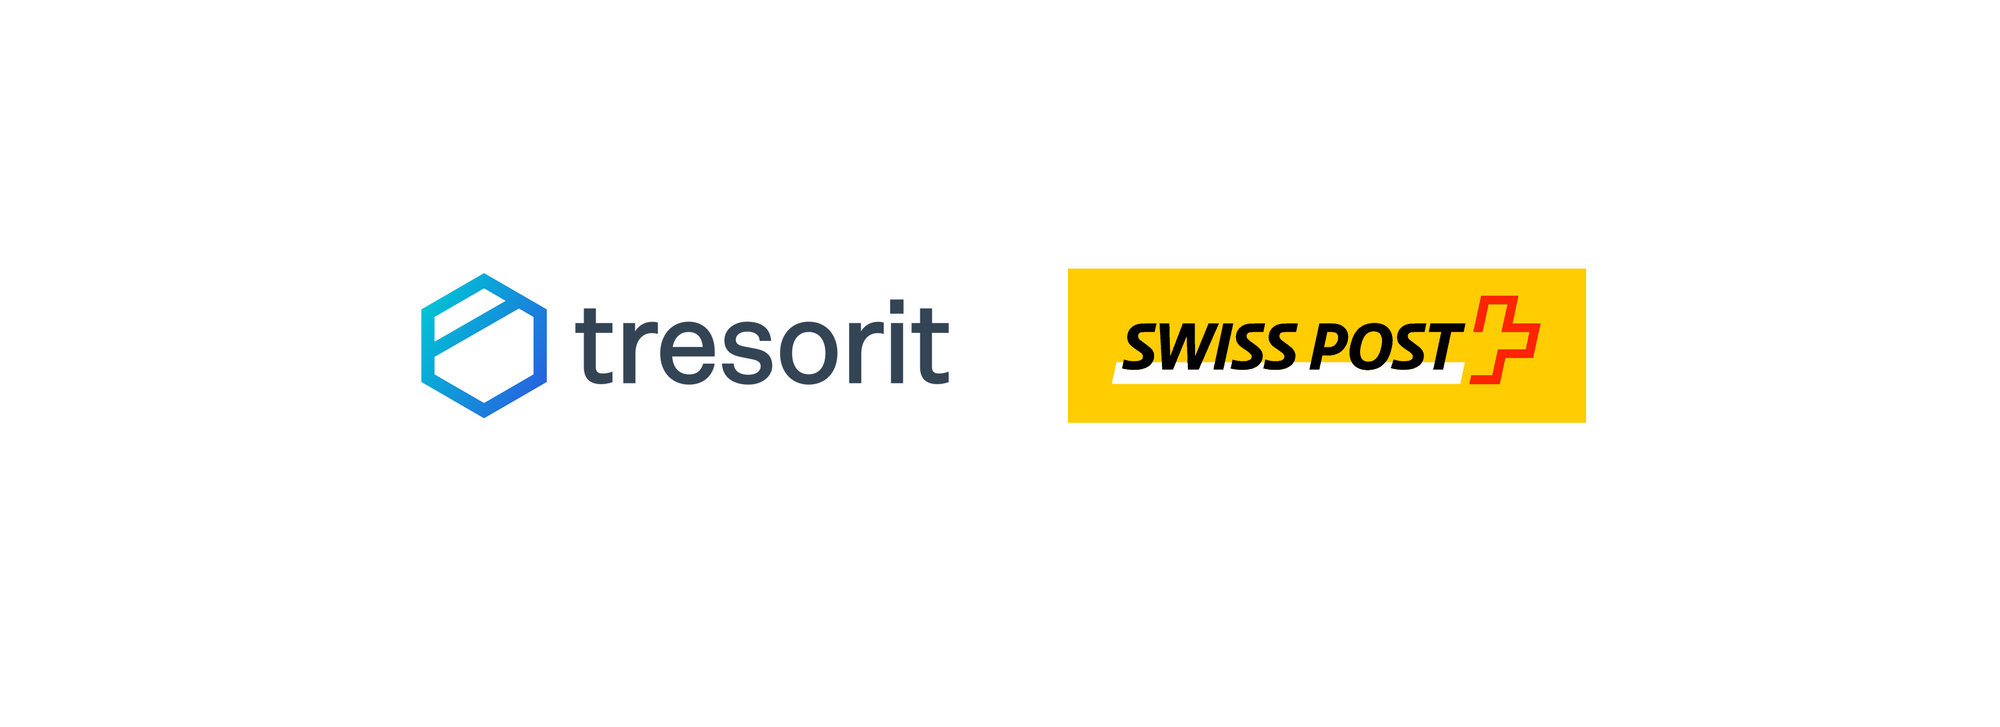 Next milestone in our history: Tresorit’s majority of stakes acquired by Swiss Post to join forces for privacy-first digital transformation